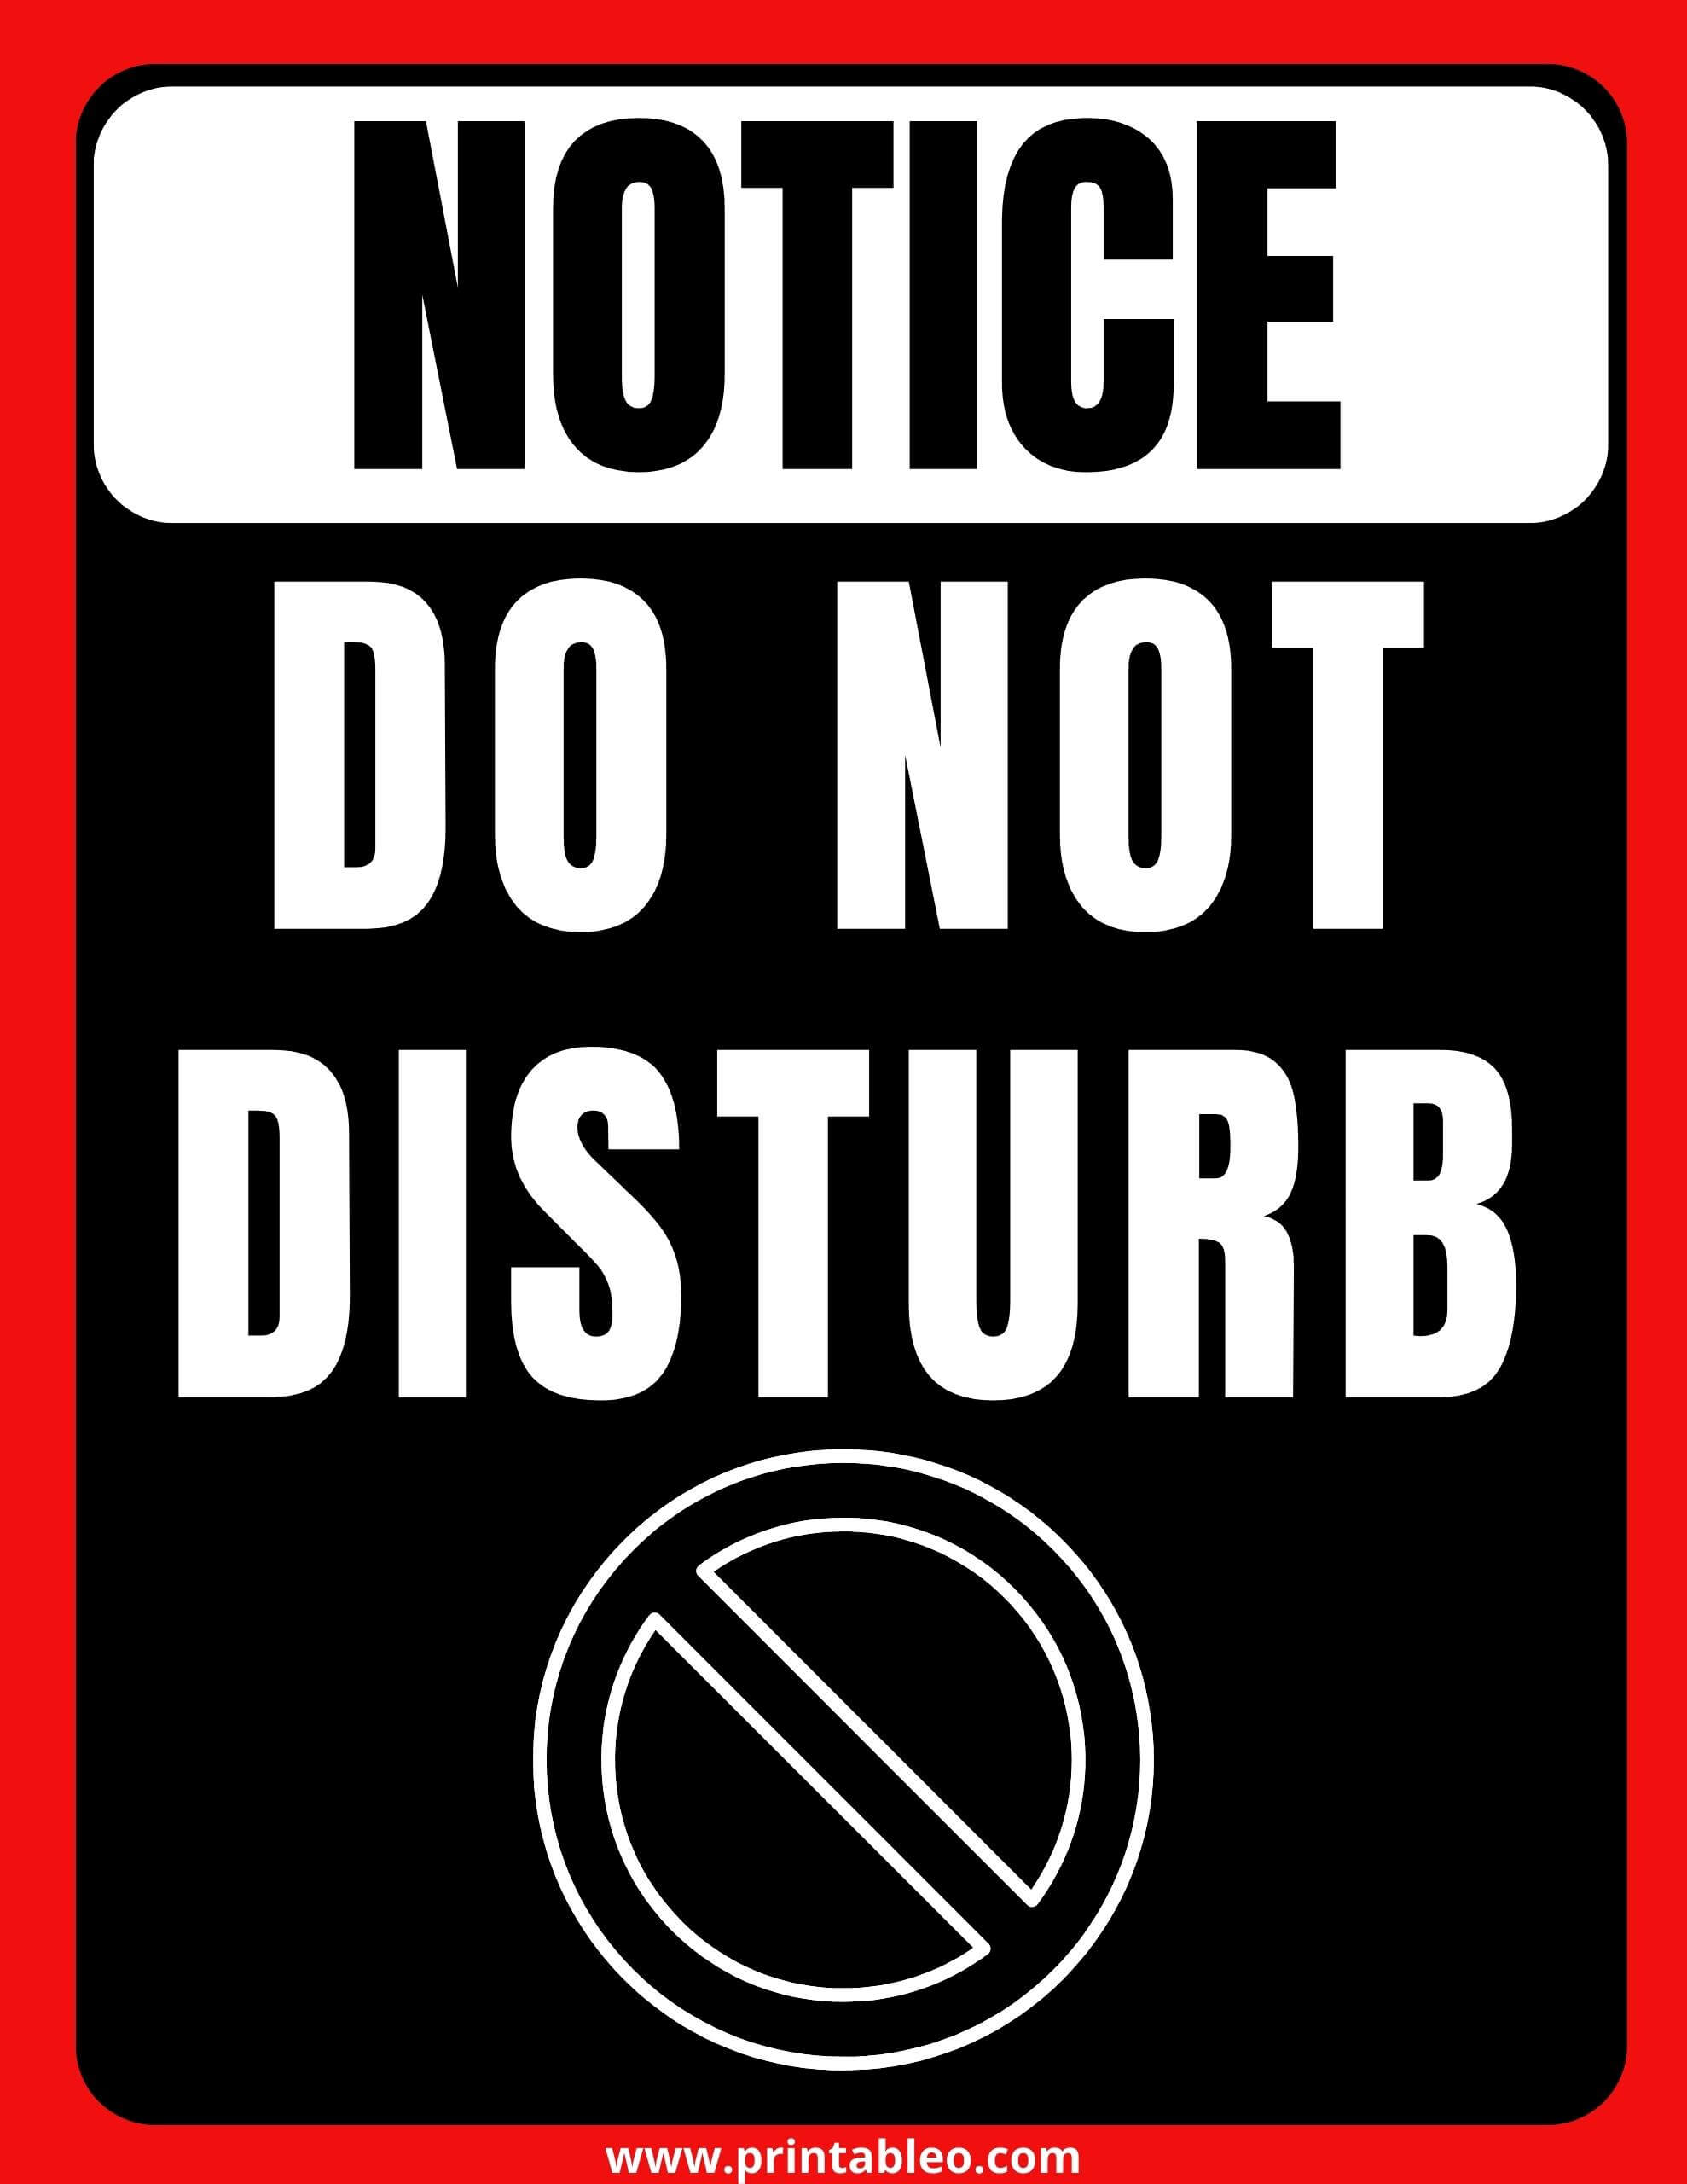 42 Printable Do Not Disturb Sign For Roomshotelsmeetings 3960